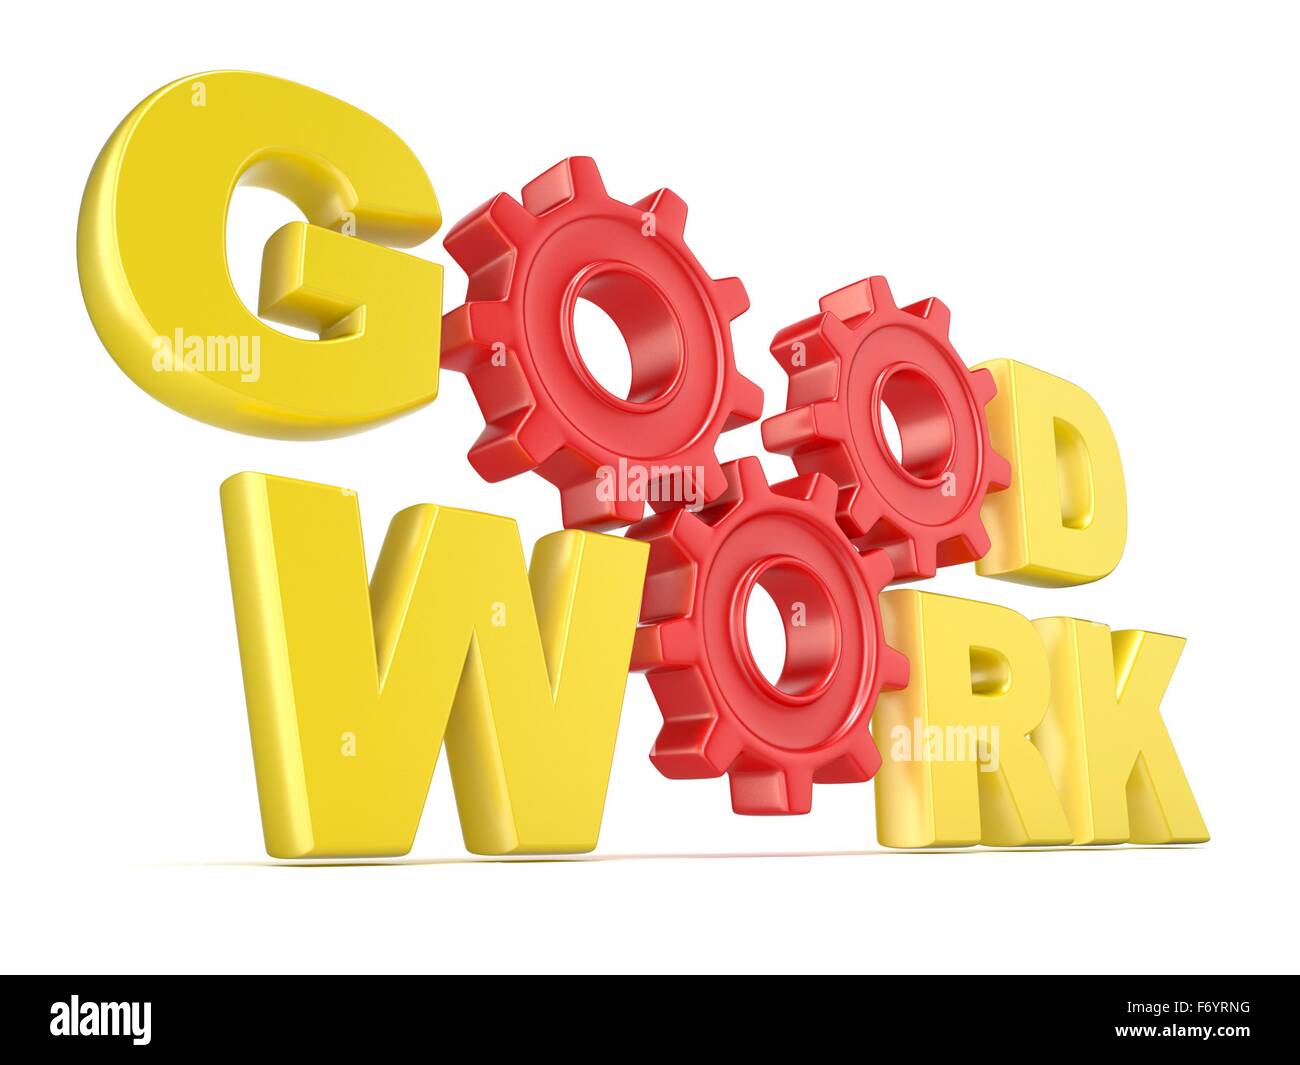 The words GOOD WORK in 3D letters and gear wheels. Render illustration isolated on white background Stock Photo